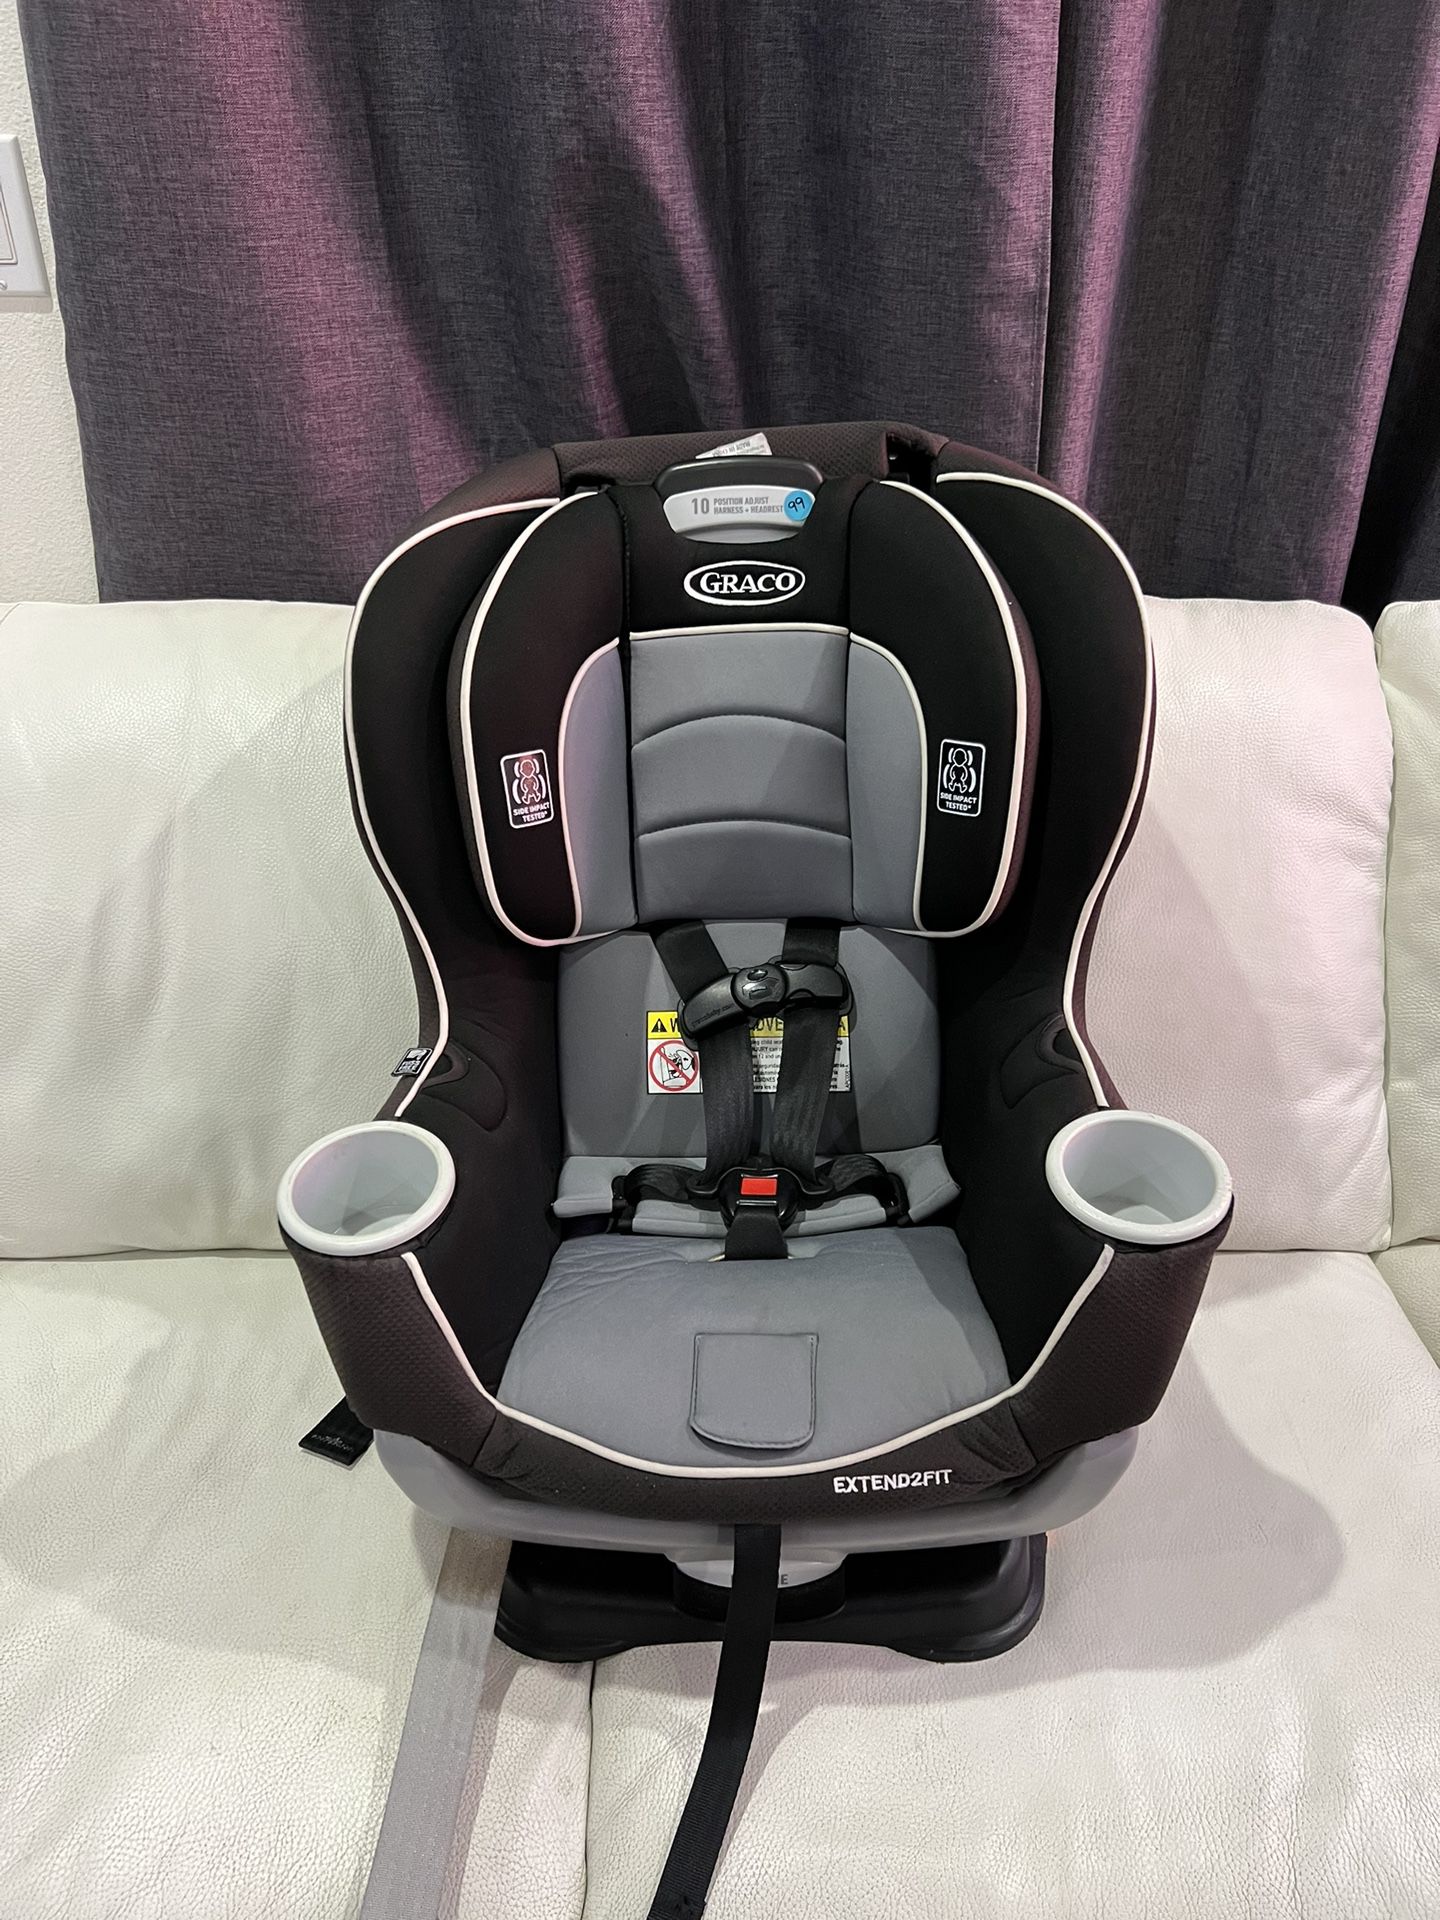 Graco EXTEND2FIT Car seat, Rear & Foward facing, convertible, recliner, all ages baby to kid/ Silla carro convertible reclinable